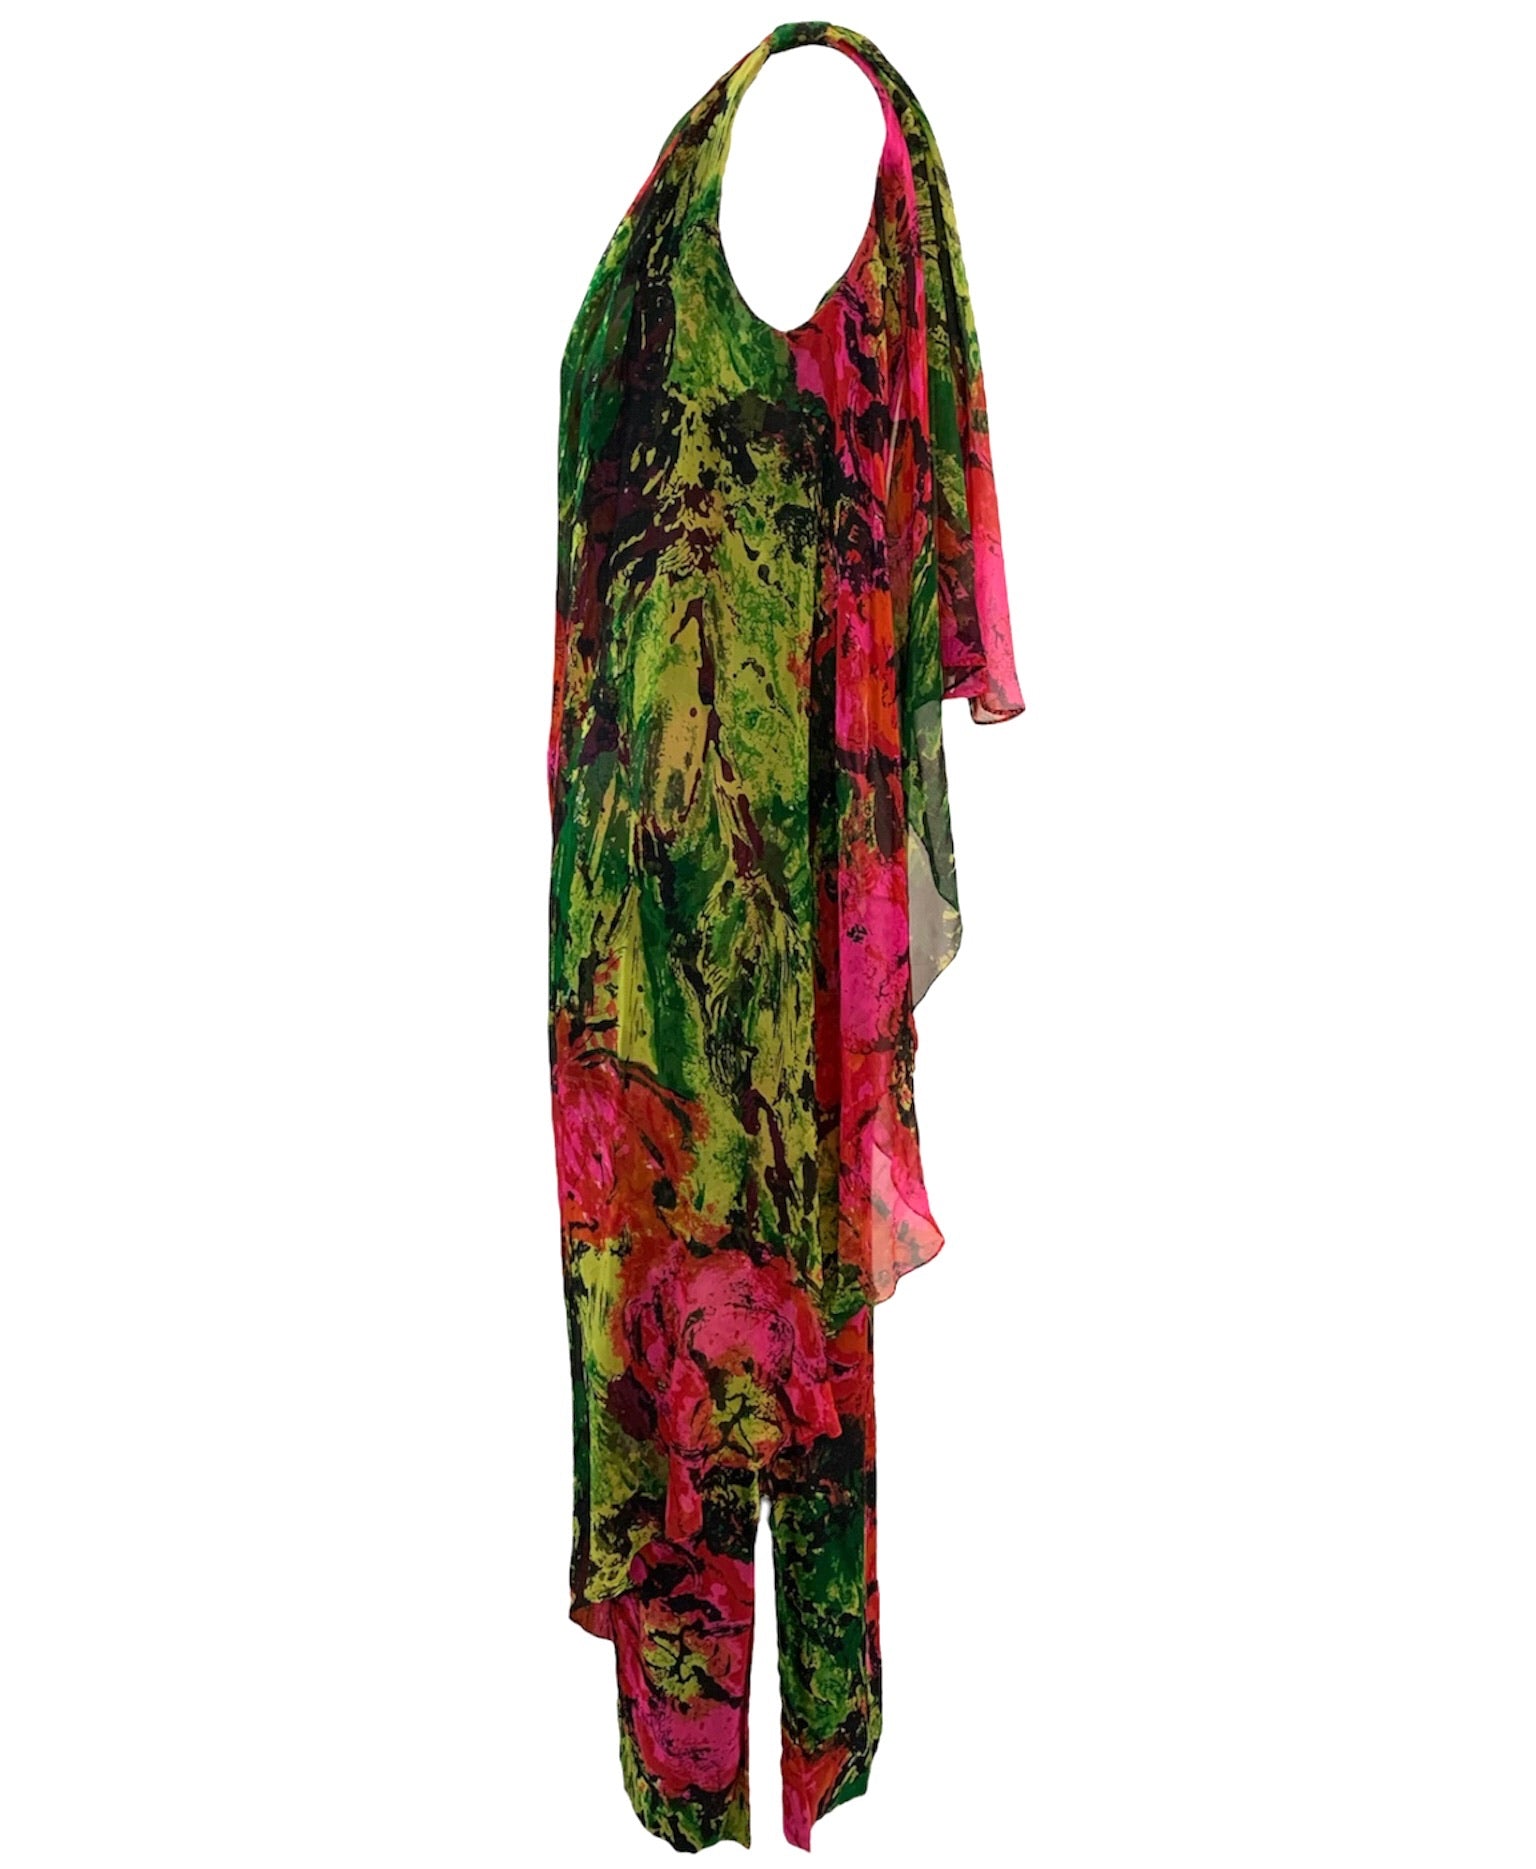 1960s Unlabeled Jewel Tone Floral Chiffon Sheath Gown SIDE 2 of 5